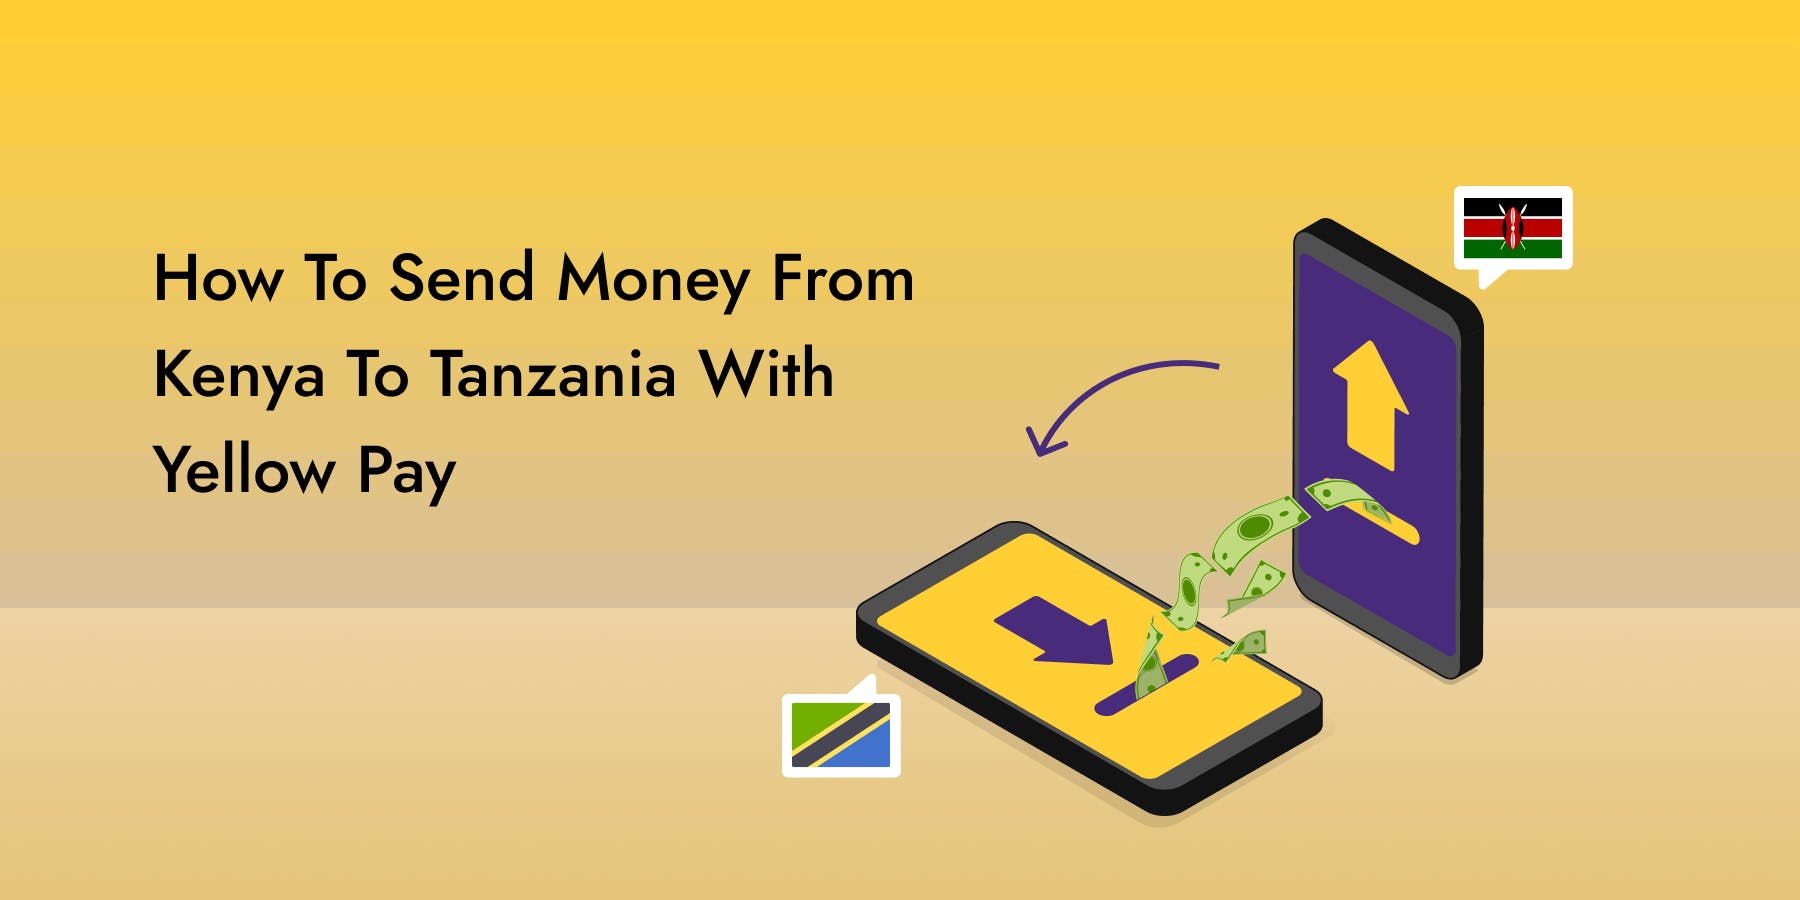 How To Send Money From Kenya To Tanzania With Yellow Pay